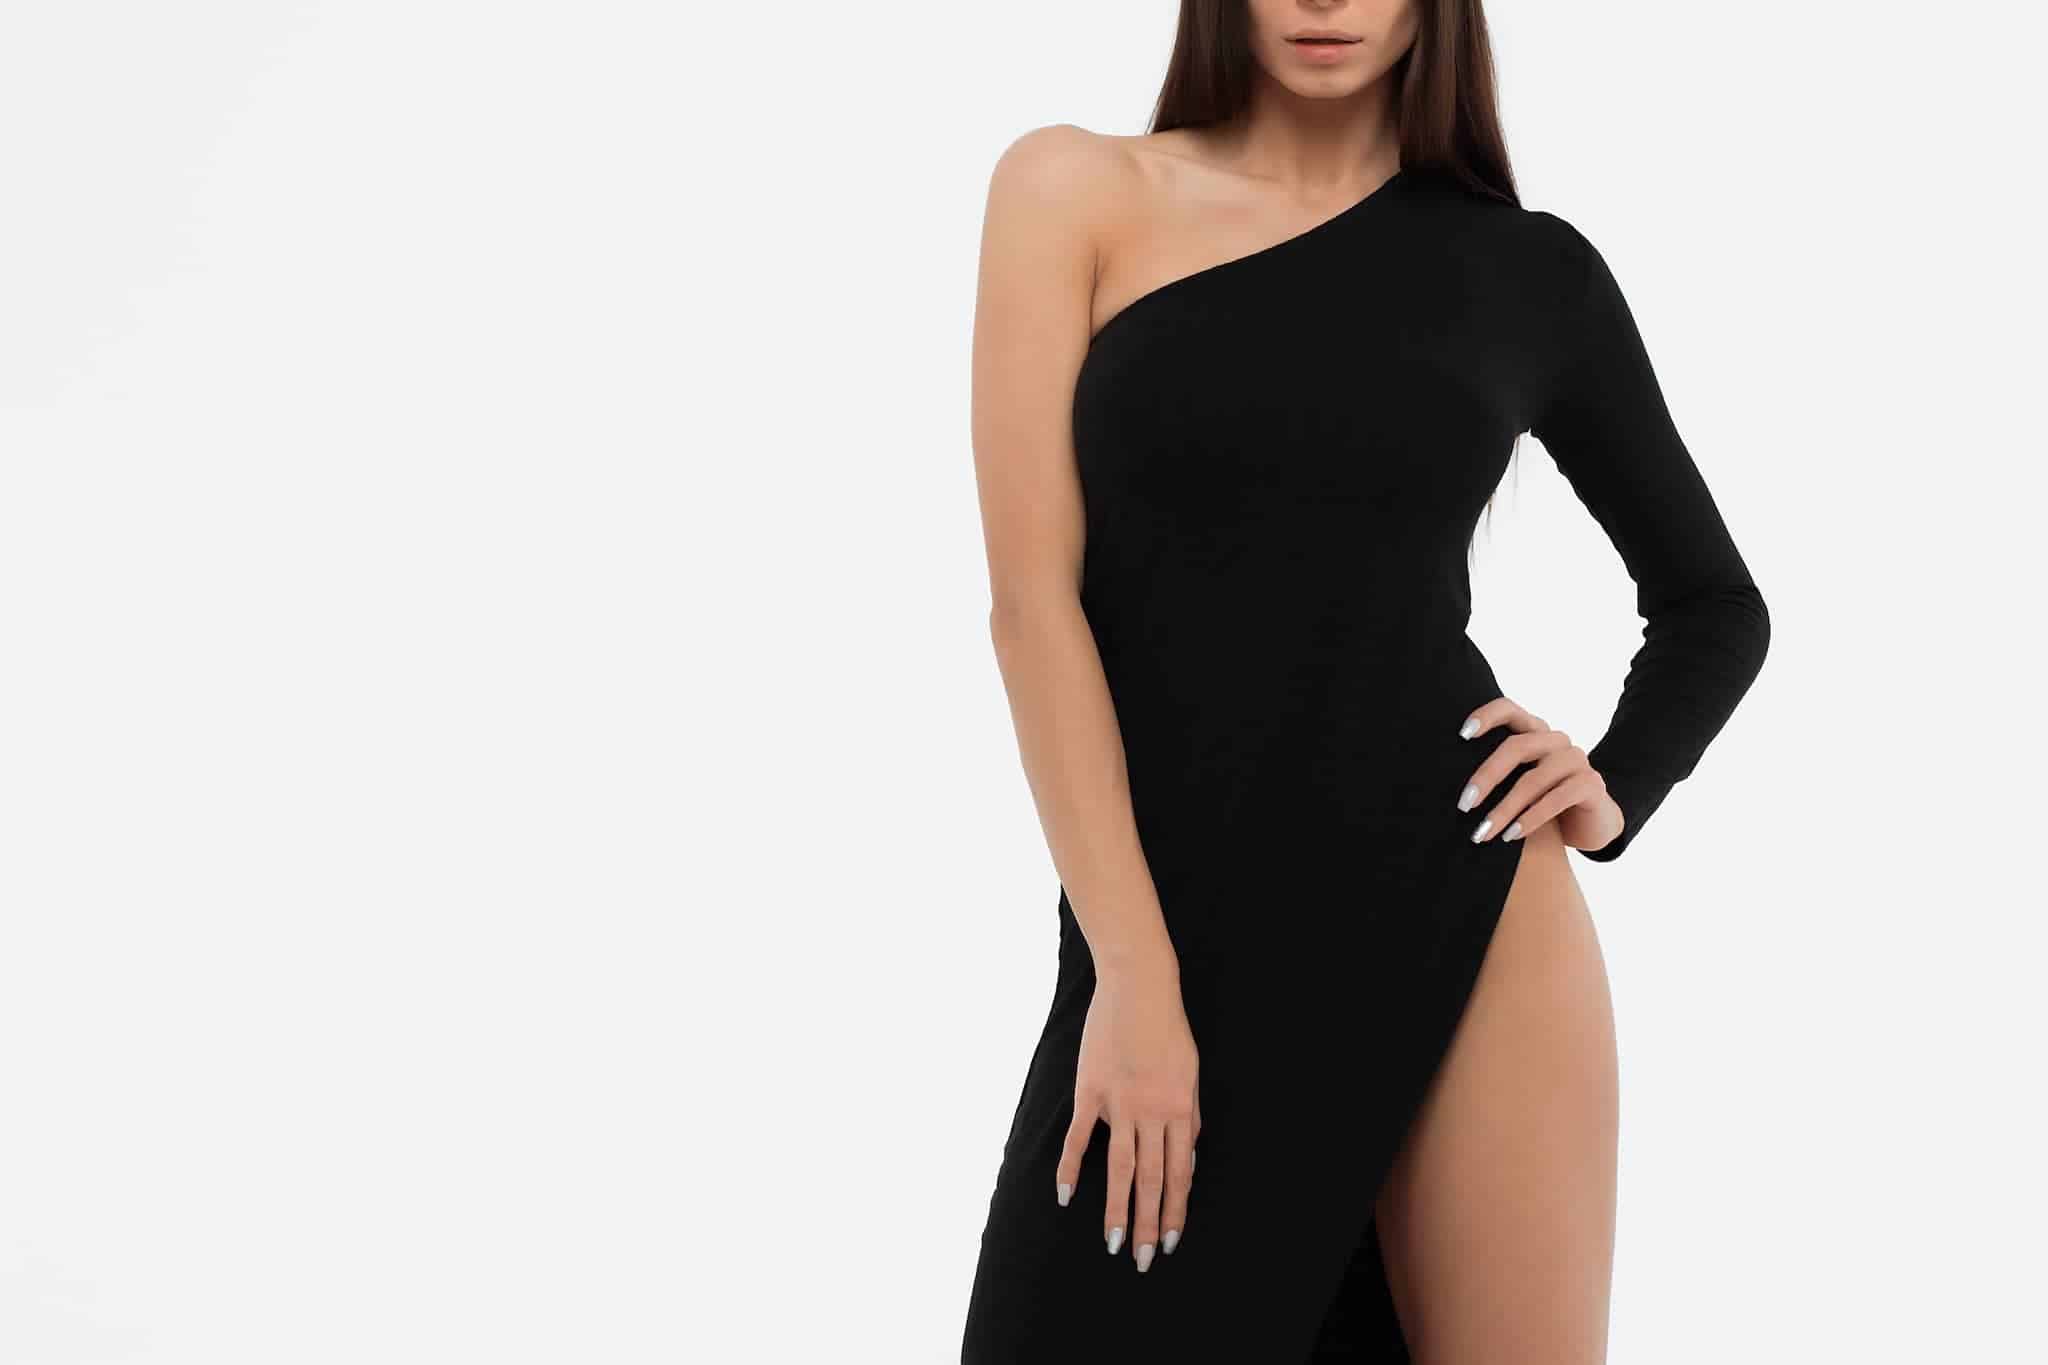 A Closer Look at the New Bodycon Trend